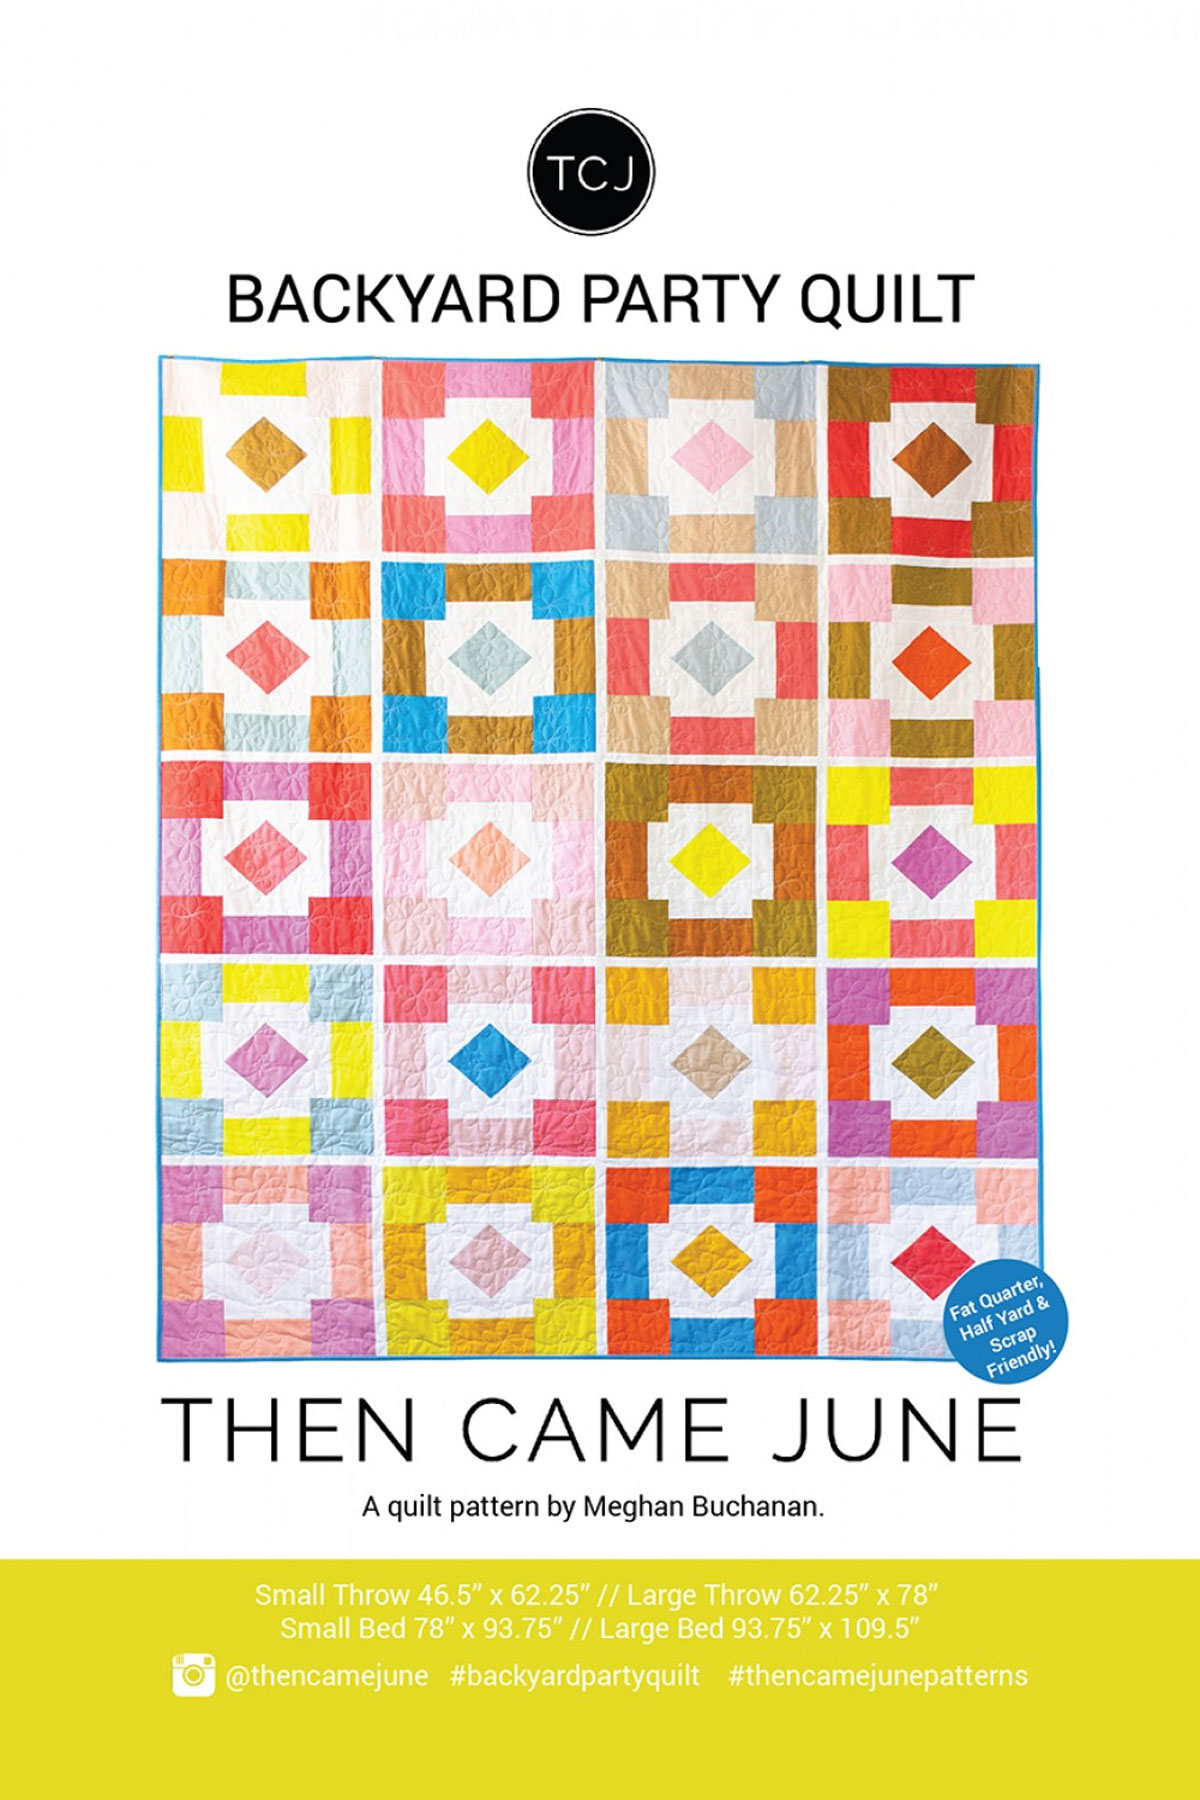 Backyard-Party-quilt-sewing-pattern-Then-Came-June-Meghan-Buchanan-front